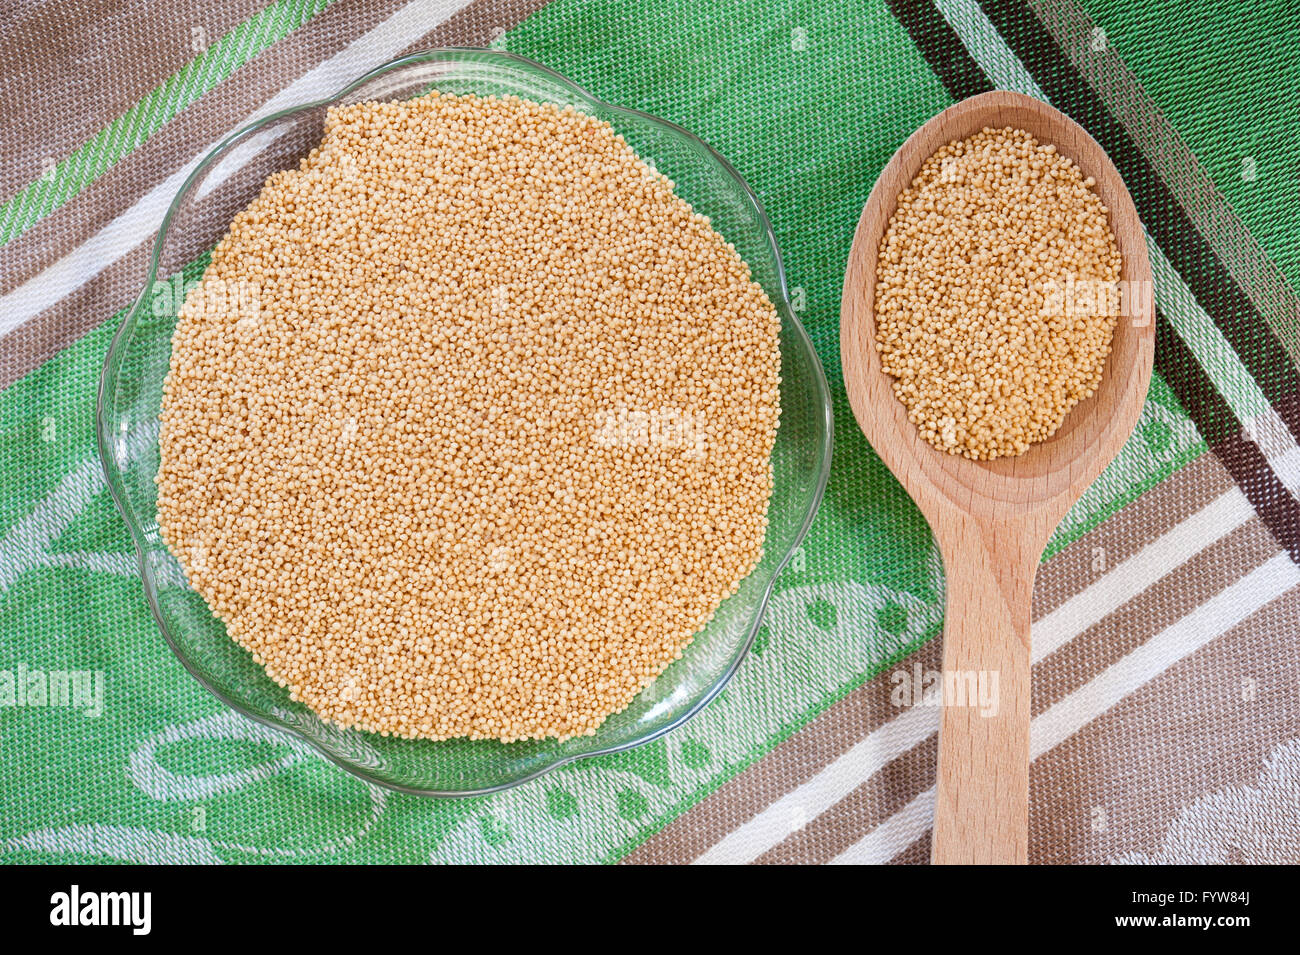 Tiny amaranth grains lying on glass saucer and wooden spoon on green cloth, raw product healthy food staple portion. Stock Photo